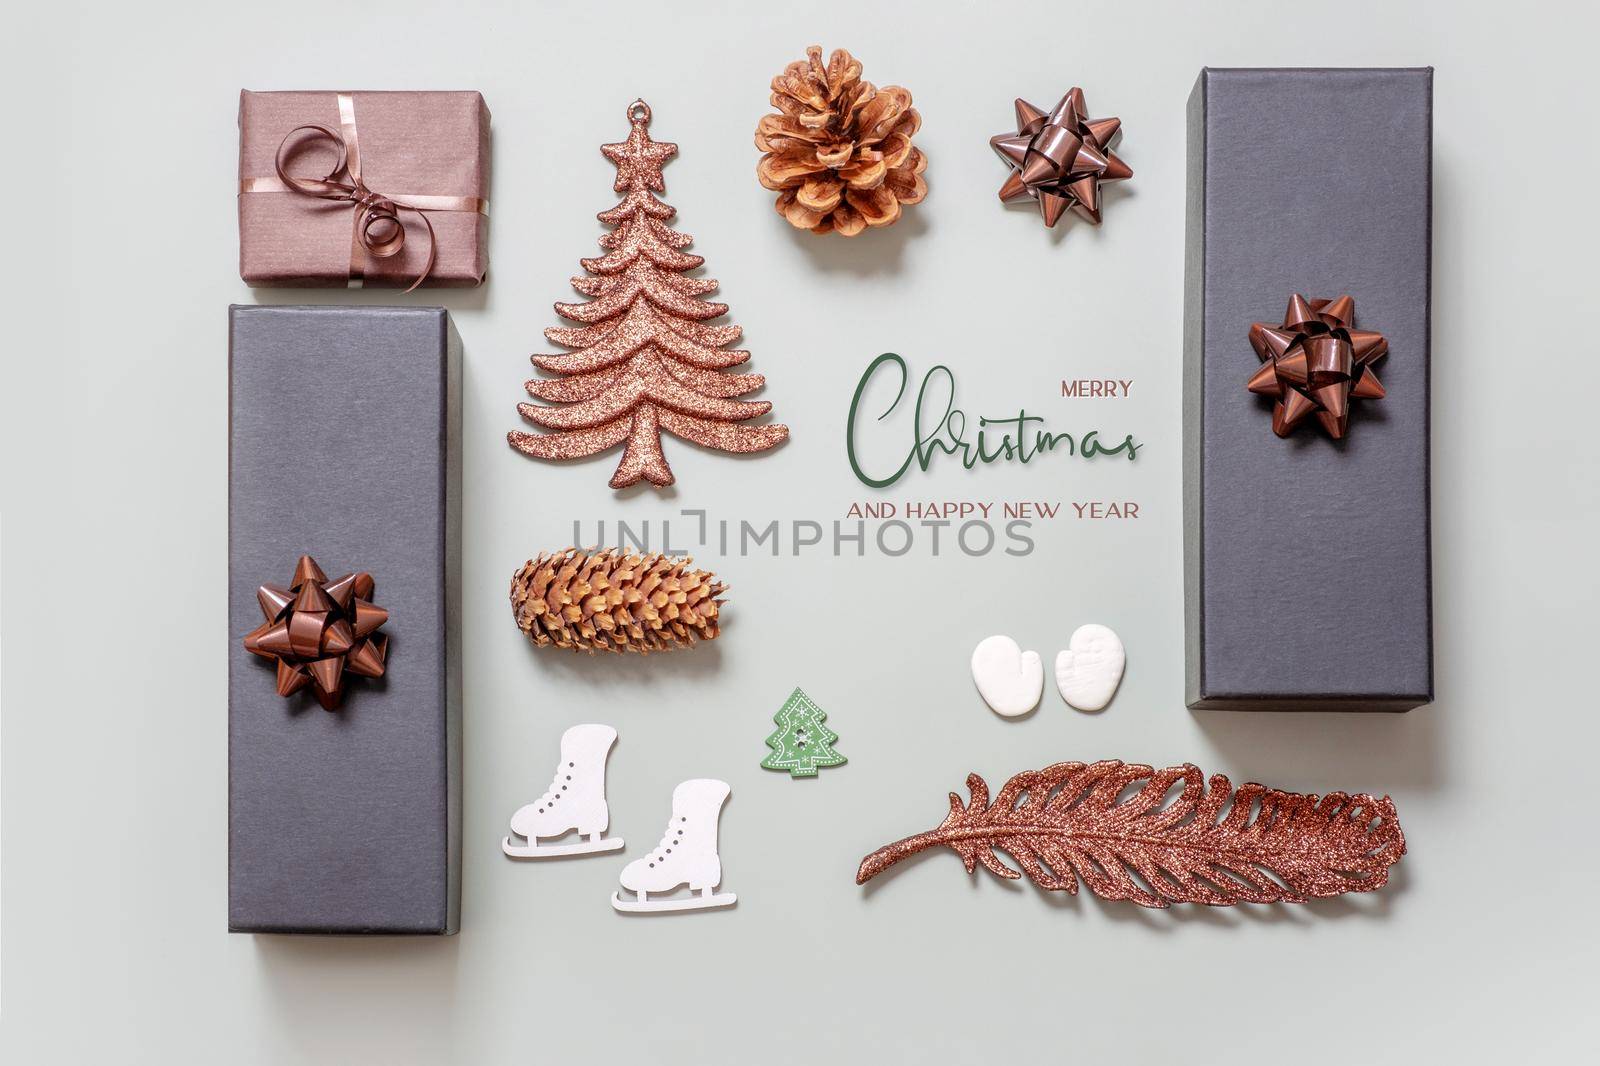 Merry Christmas and happy New Year greeting card with flatlay gifts and holiday decor top view by ssvimaliss